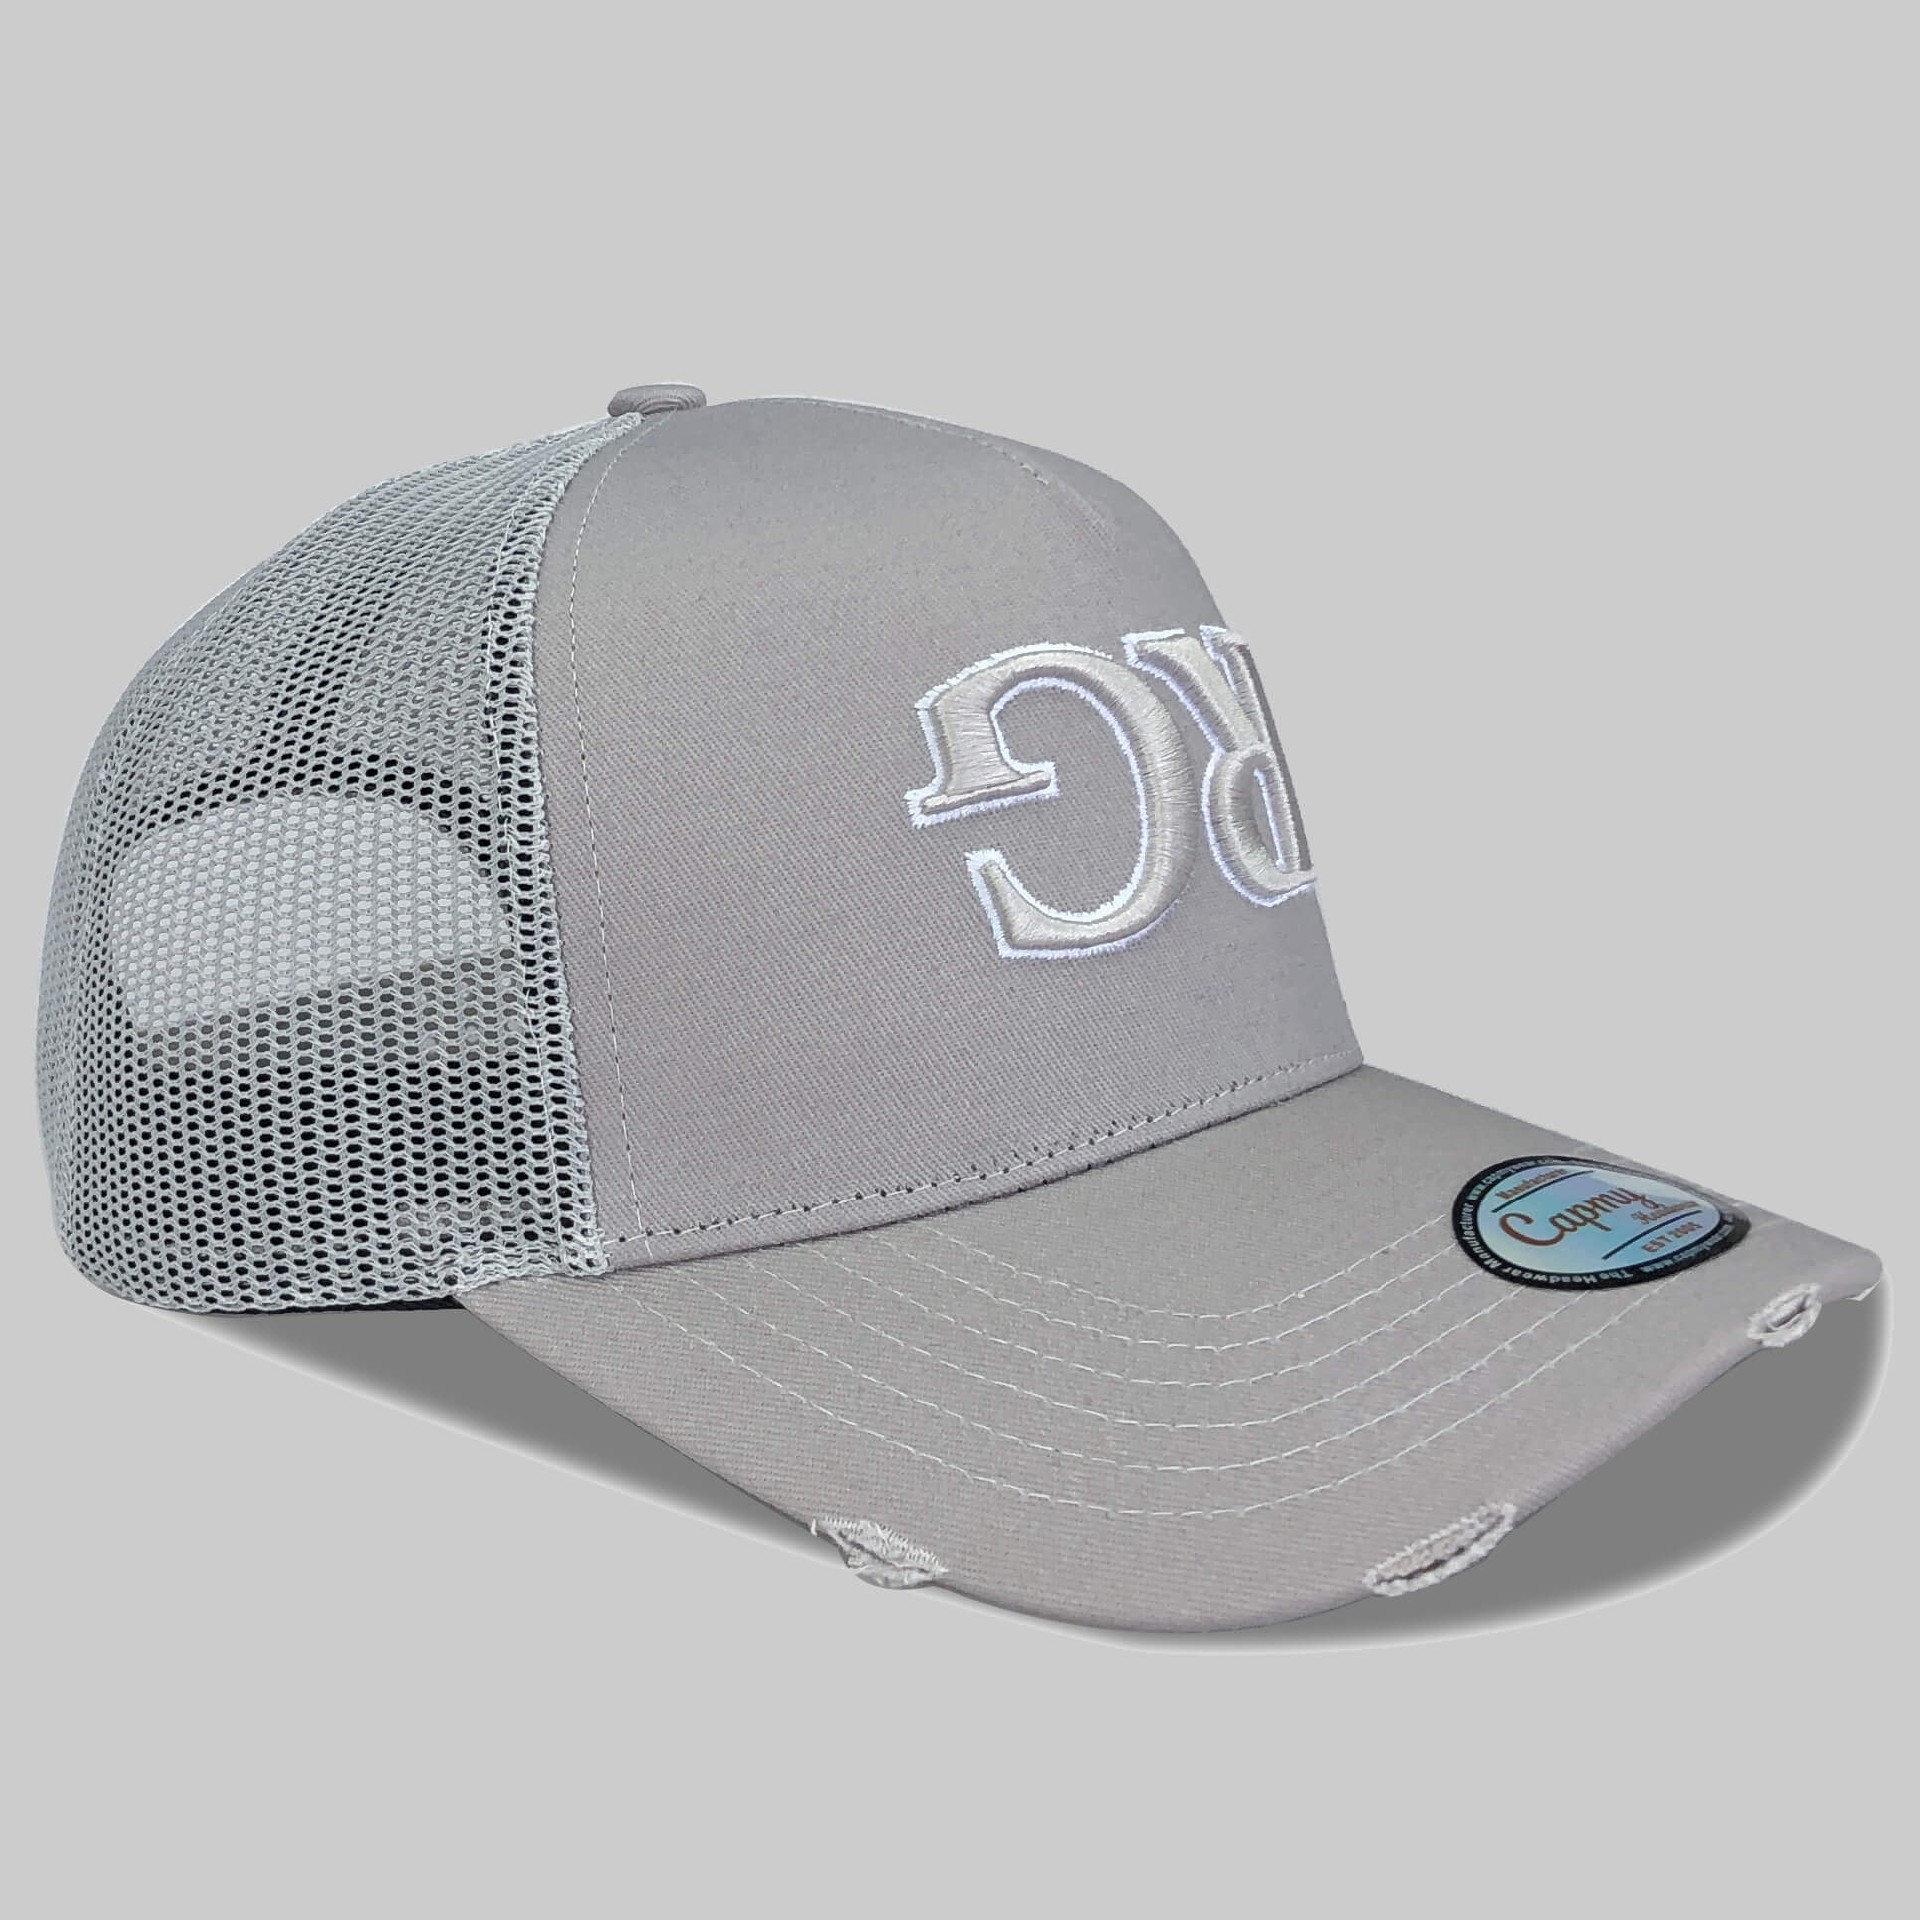 CMC-3130(Wholesale Distressed Trucker Hats 3D Embroidered Vintage Rip Mesh Baseball Caps)